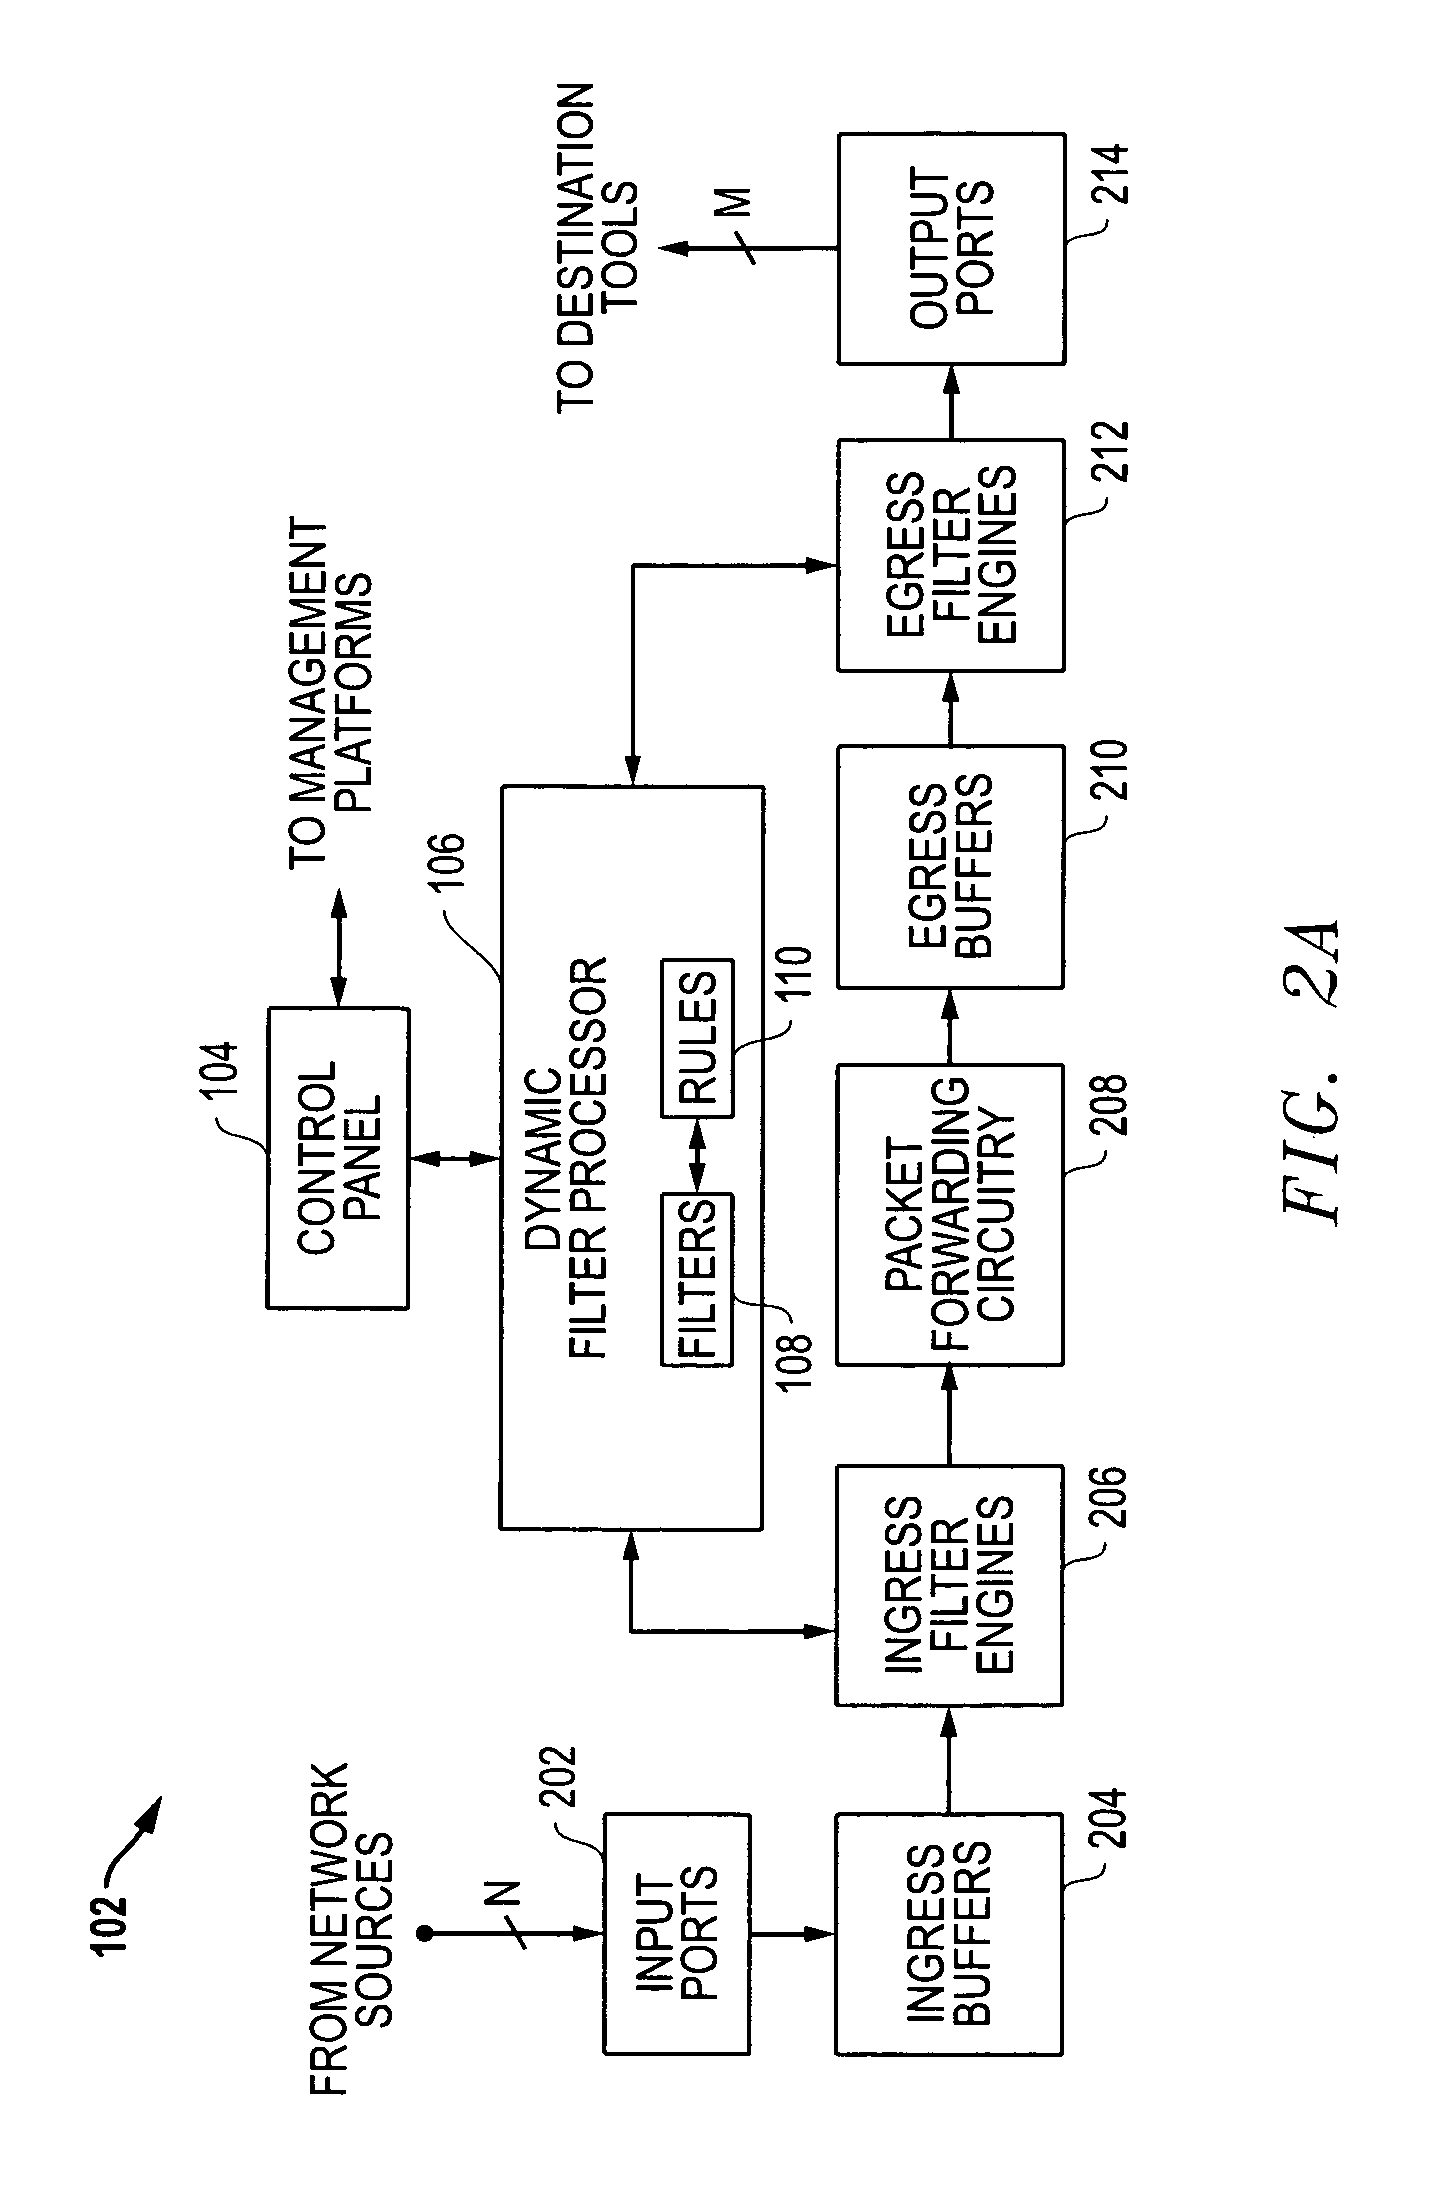 Automatic filter overlap processing and related systems and methods